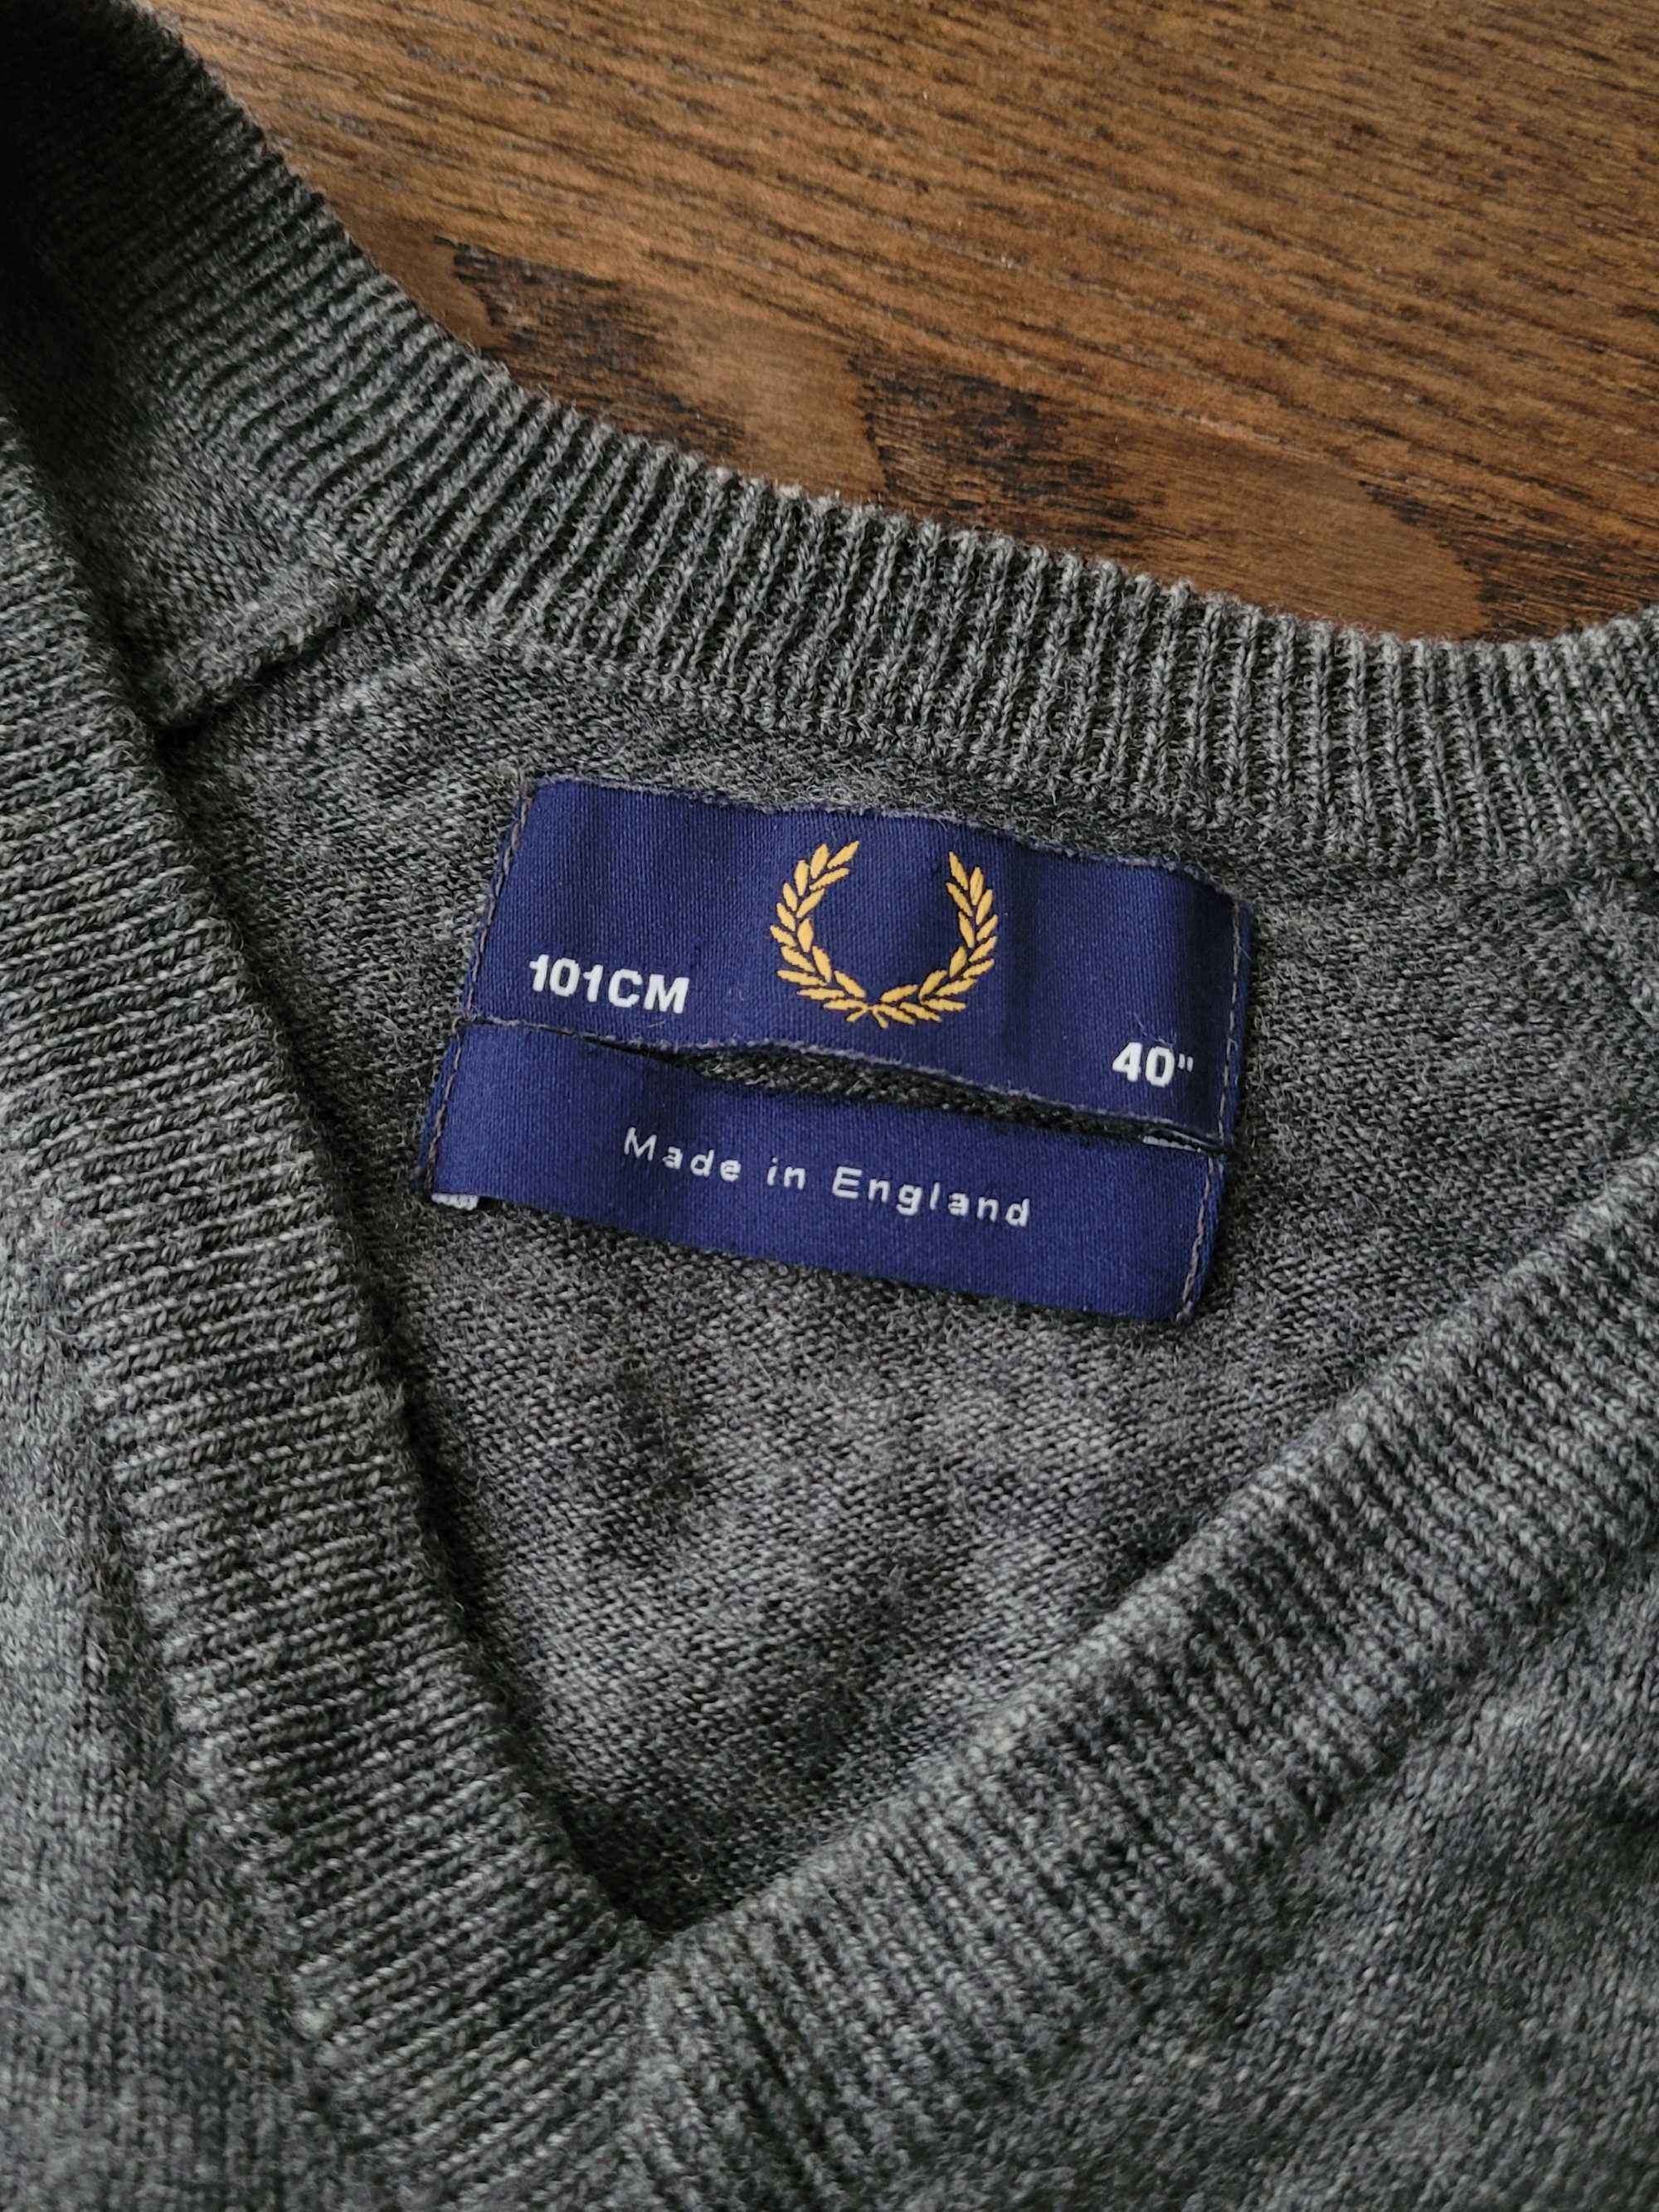 Pulover Fred Perry 100% lână, marimea M (Made in England)